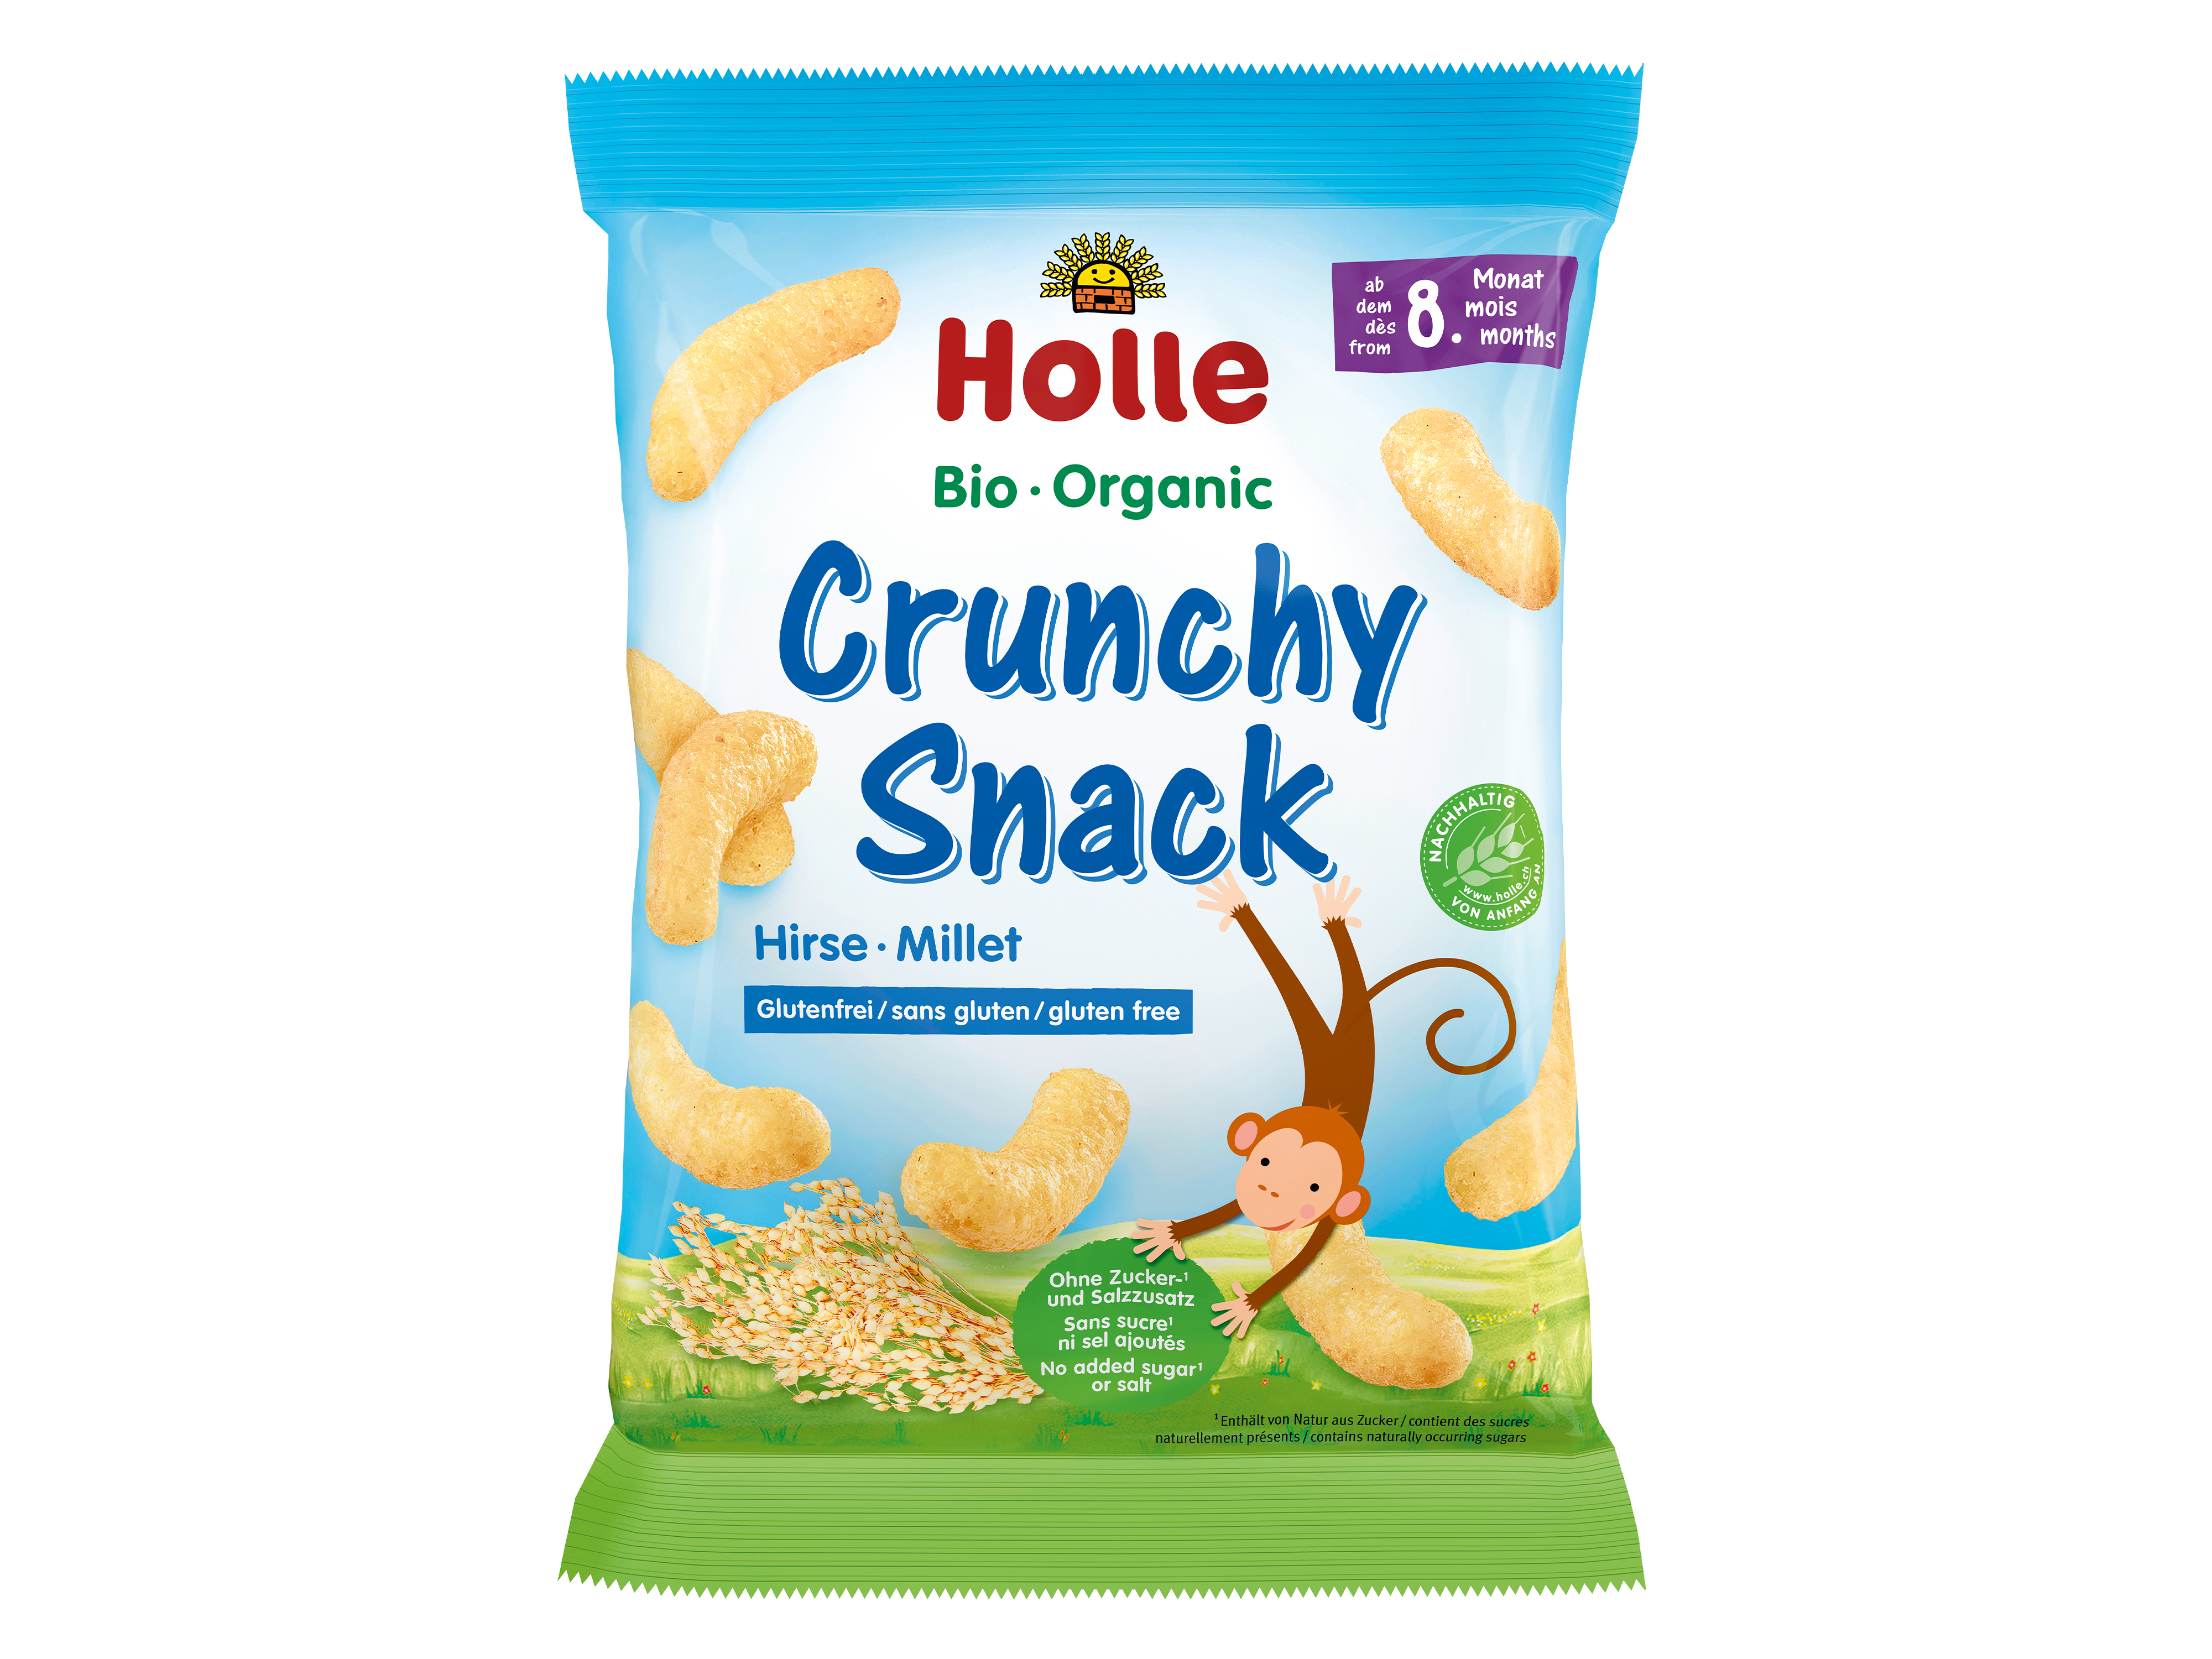 Holle Puffet Hirse Snack, 25 g